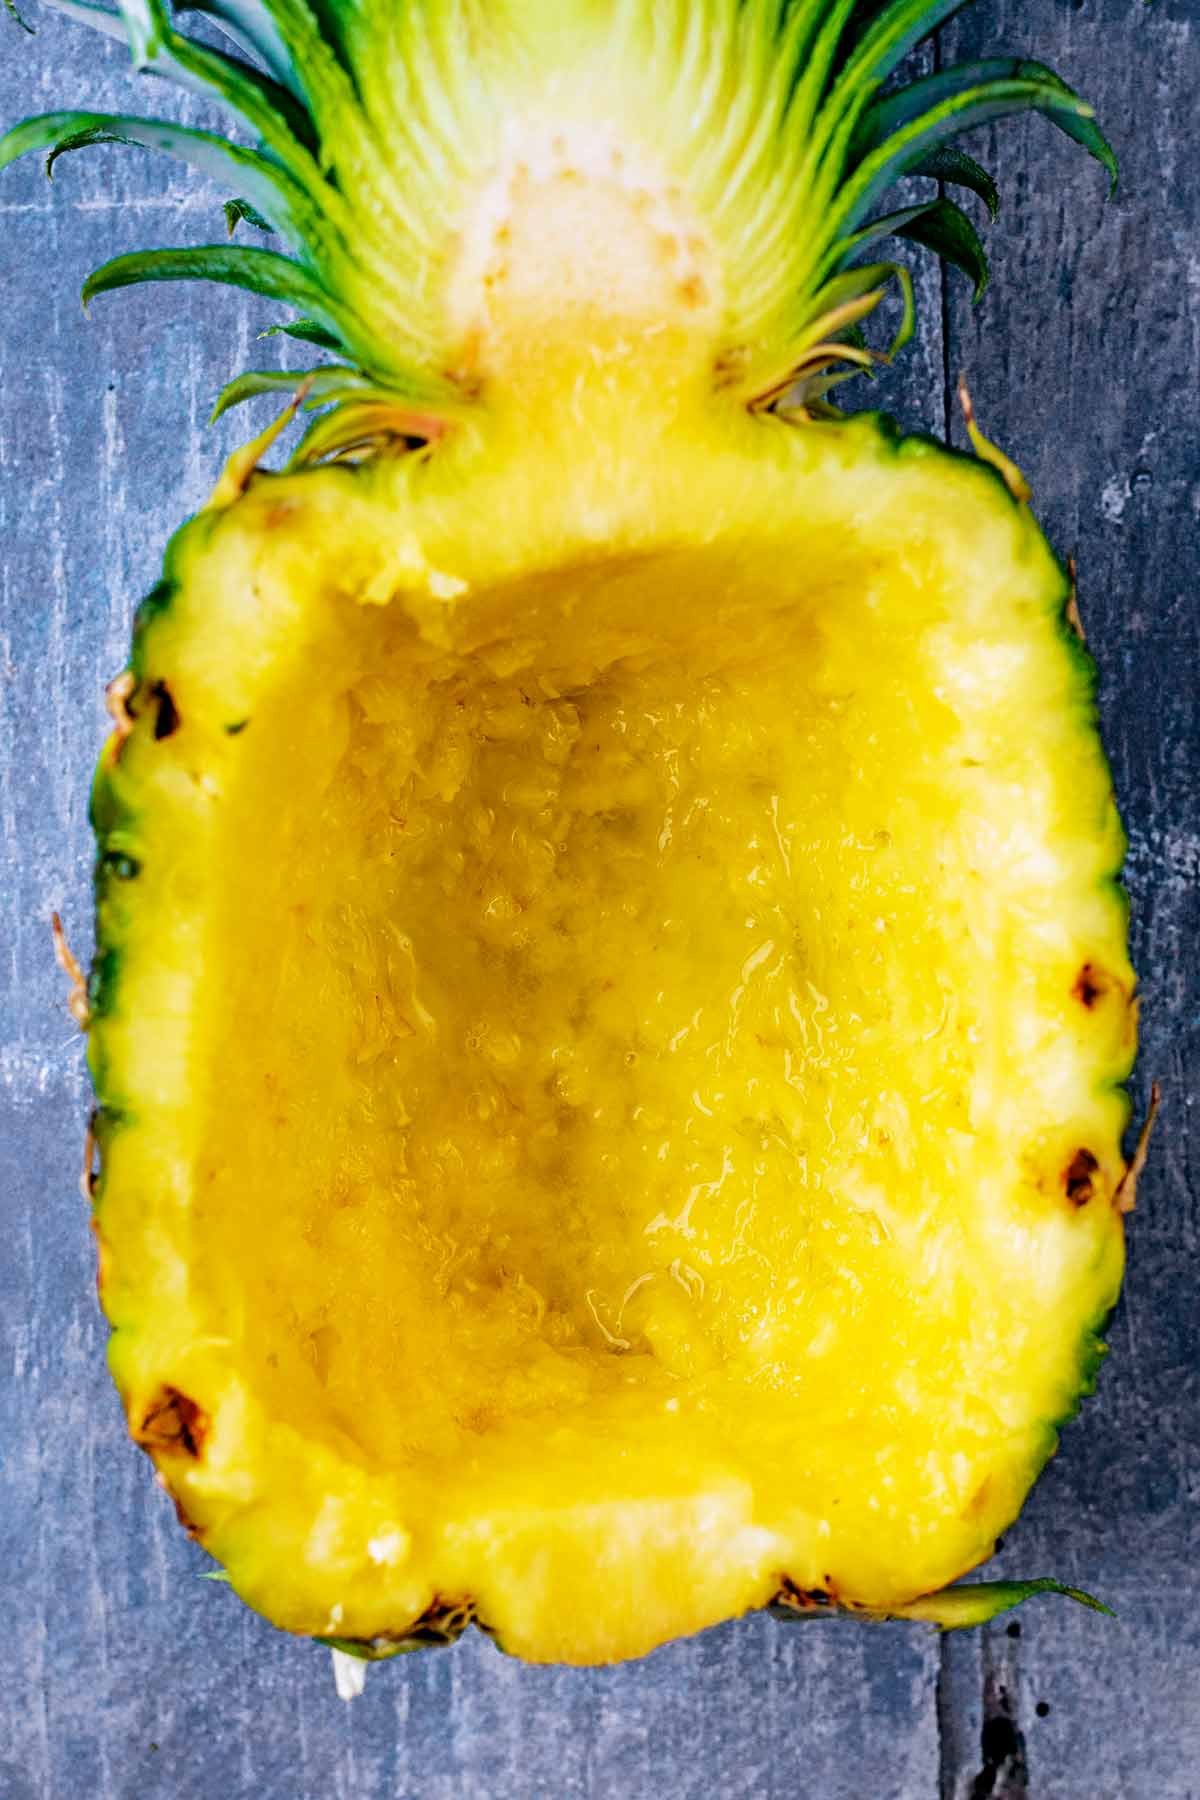 A half pineapple completely scooped out.